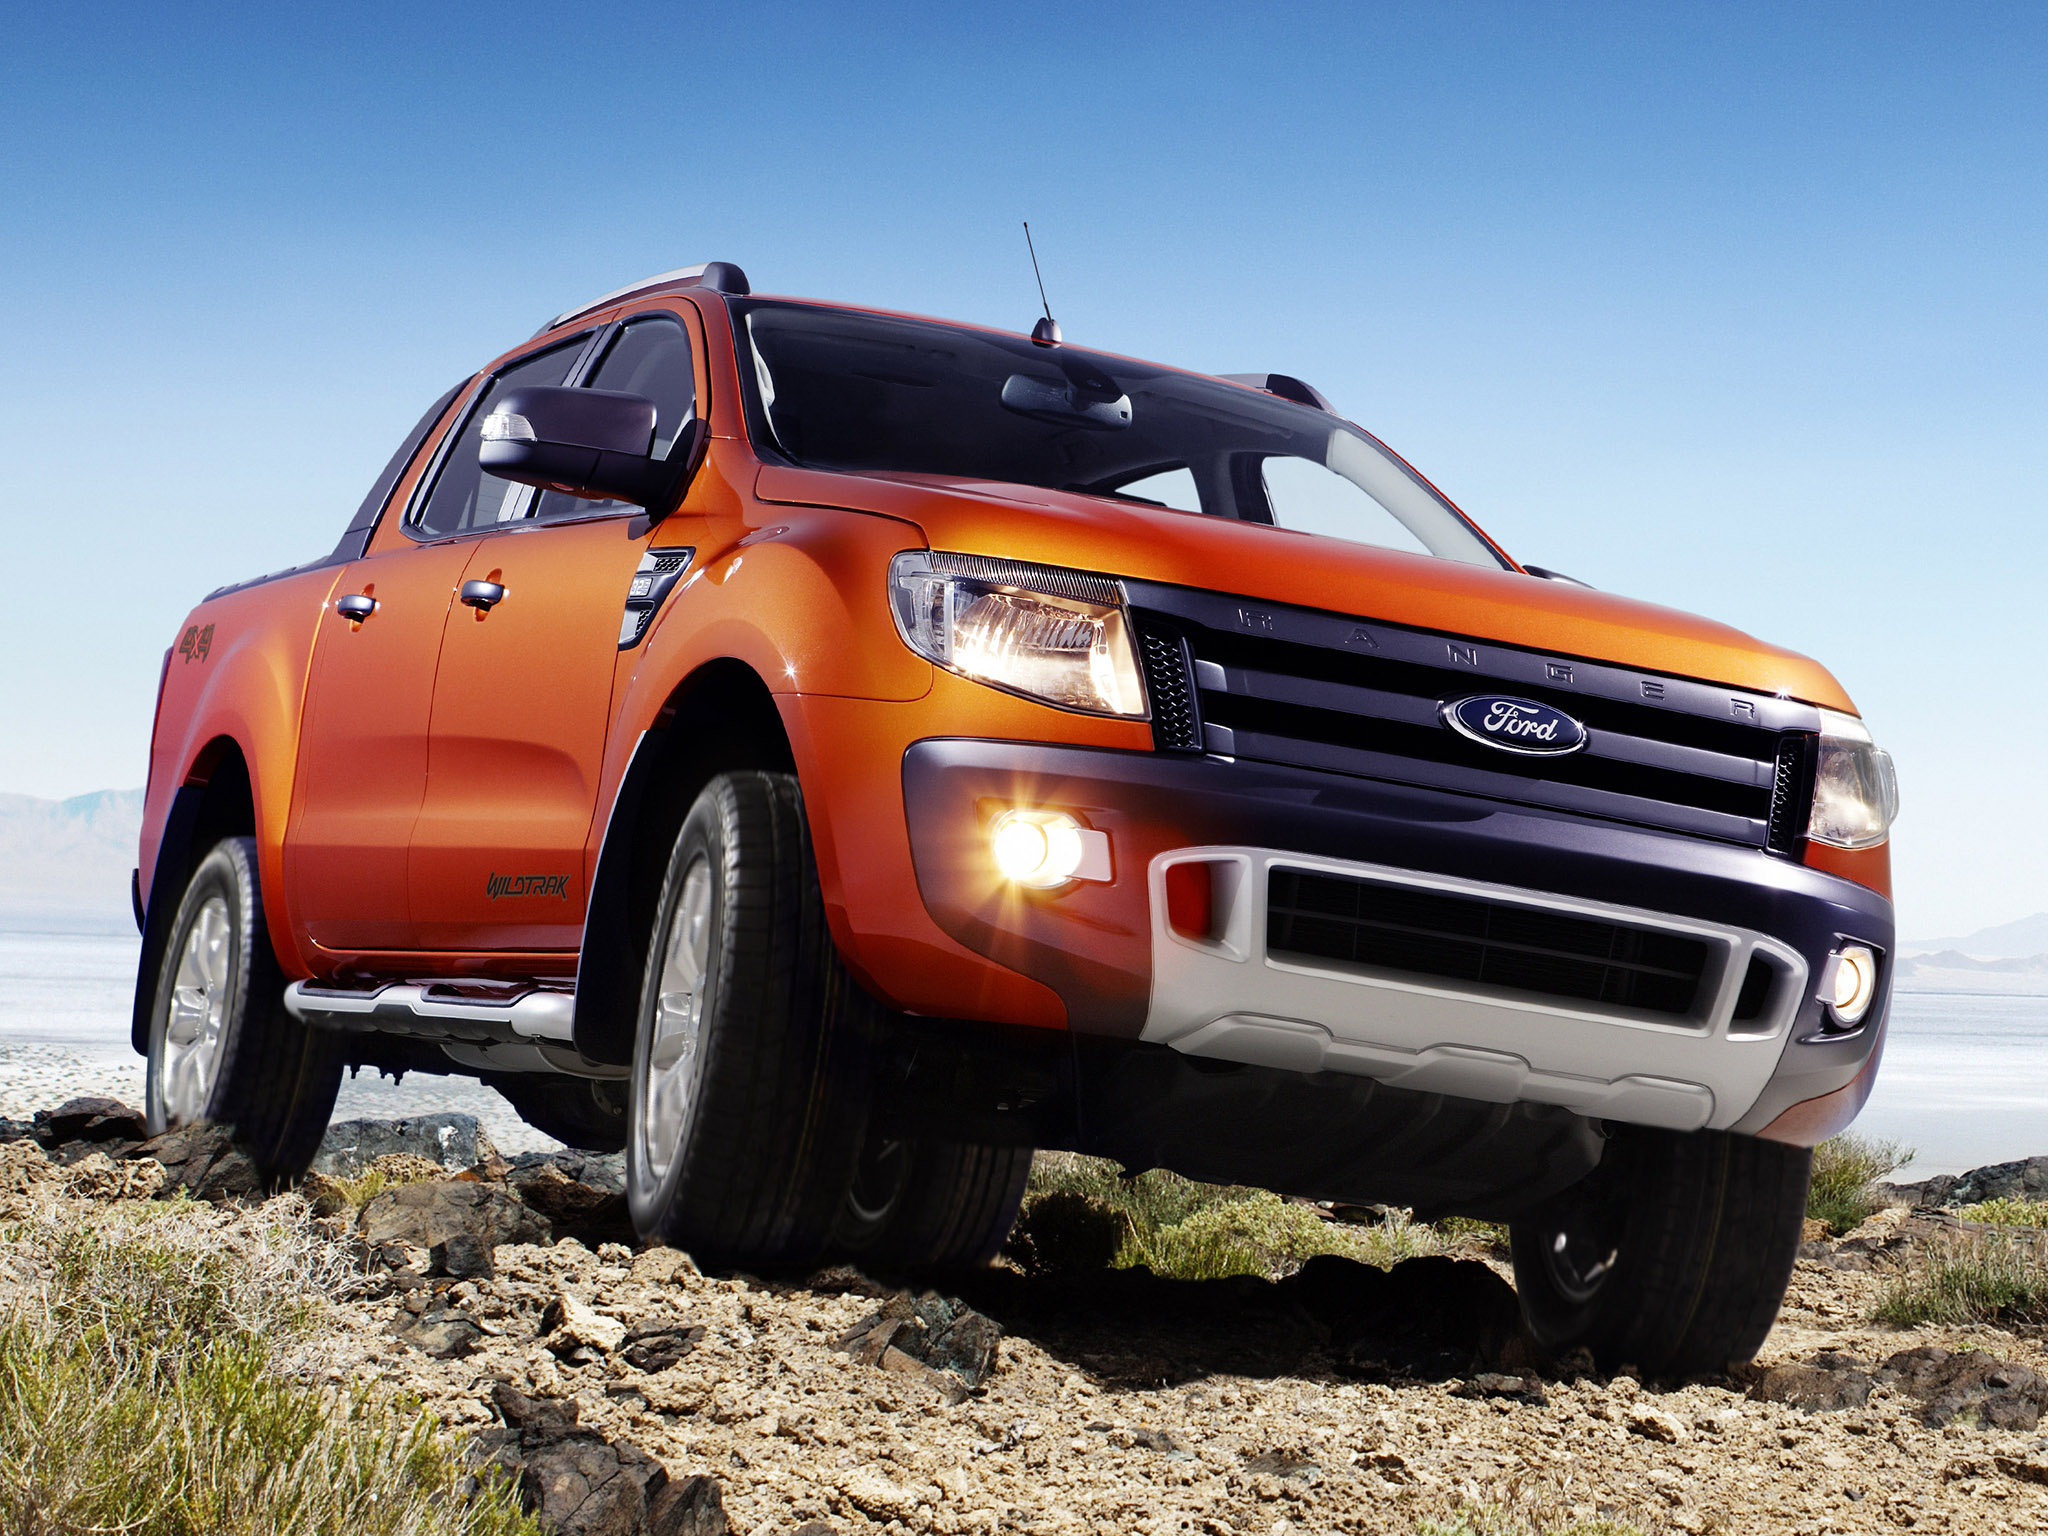 Ford Ranger: 2012 Wildtrak, The first mid-size pickup truck was assembled on October 22, 2018. 2050x1540 HD Background.